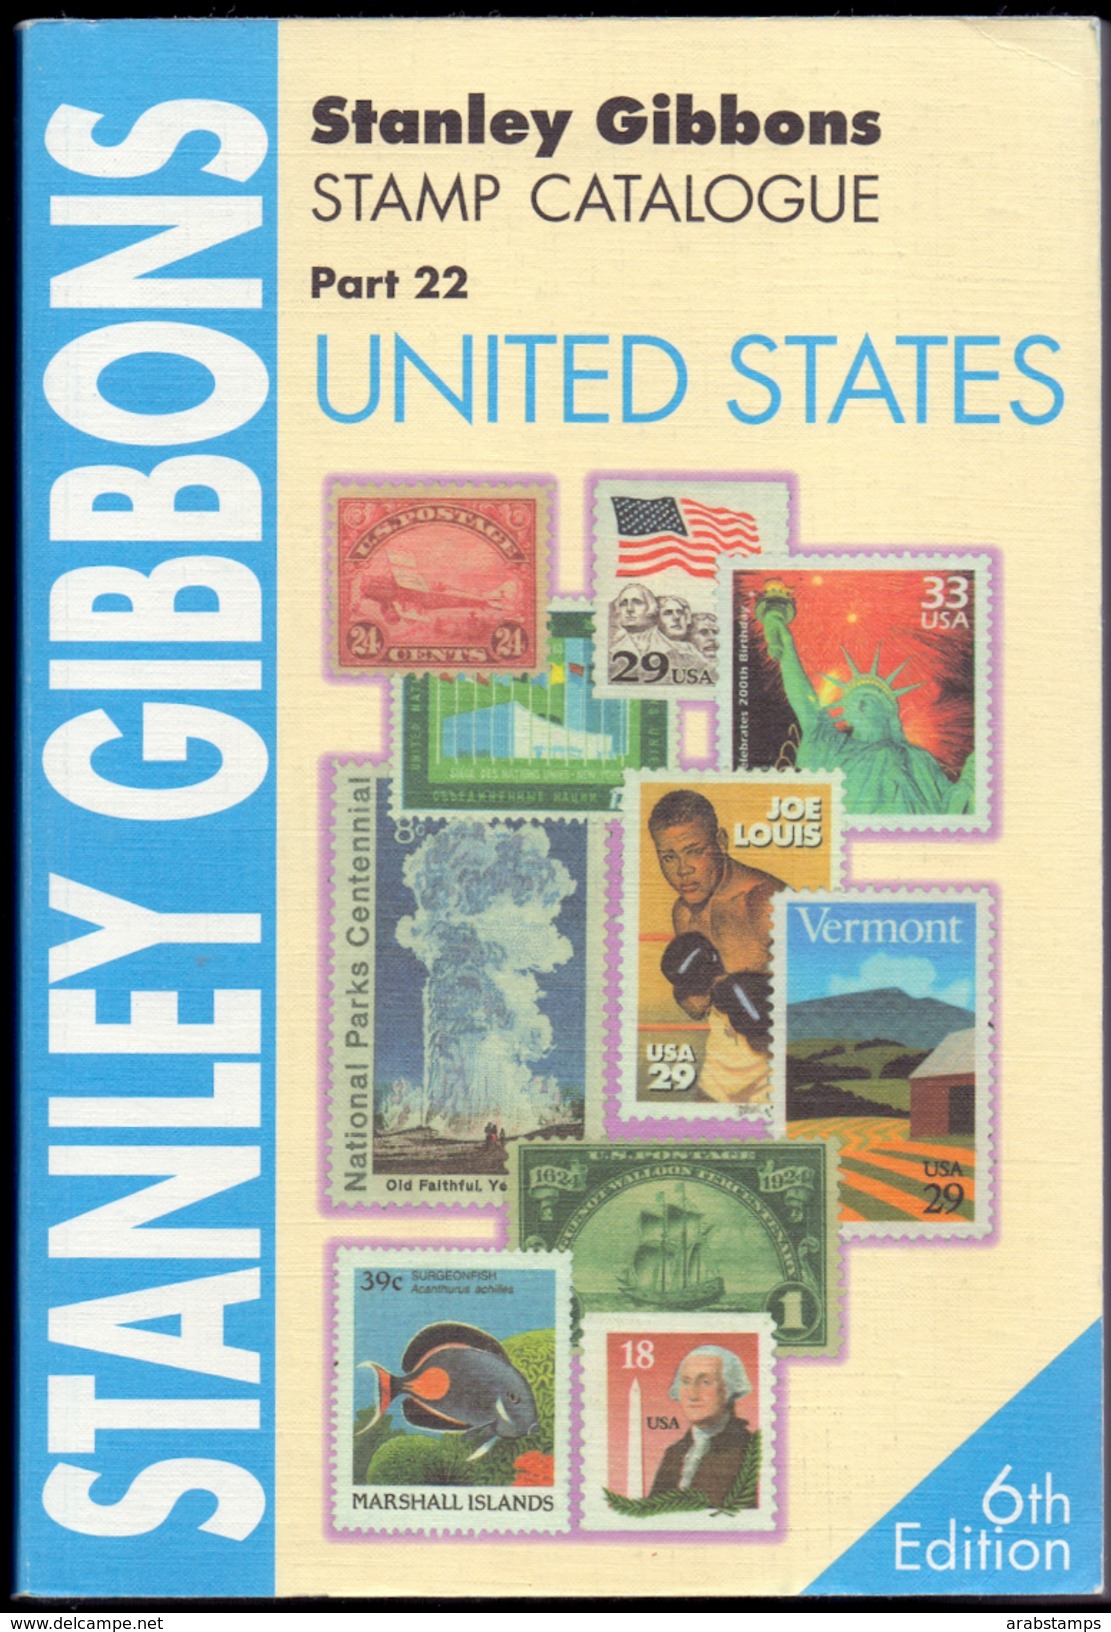 Stanley Gibbons Stamp Catalogue  UNITED STATES 2005  Part 22 Edition 6th New Not Used The Previous FREE Shipping By Regi - Books On Collecting